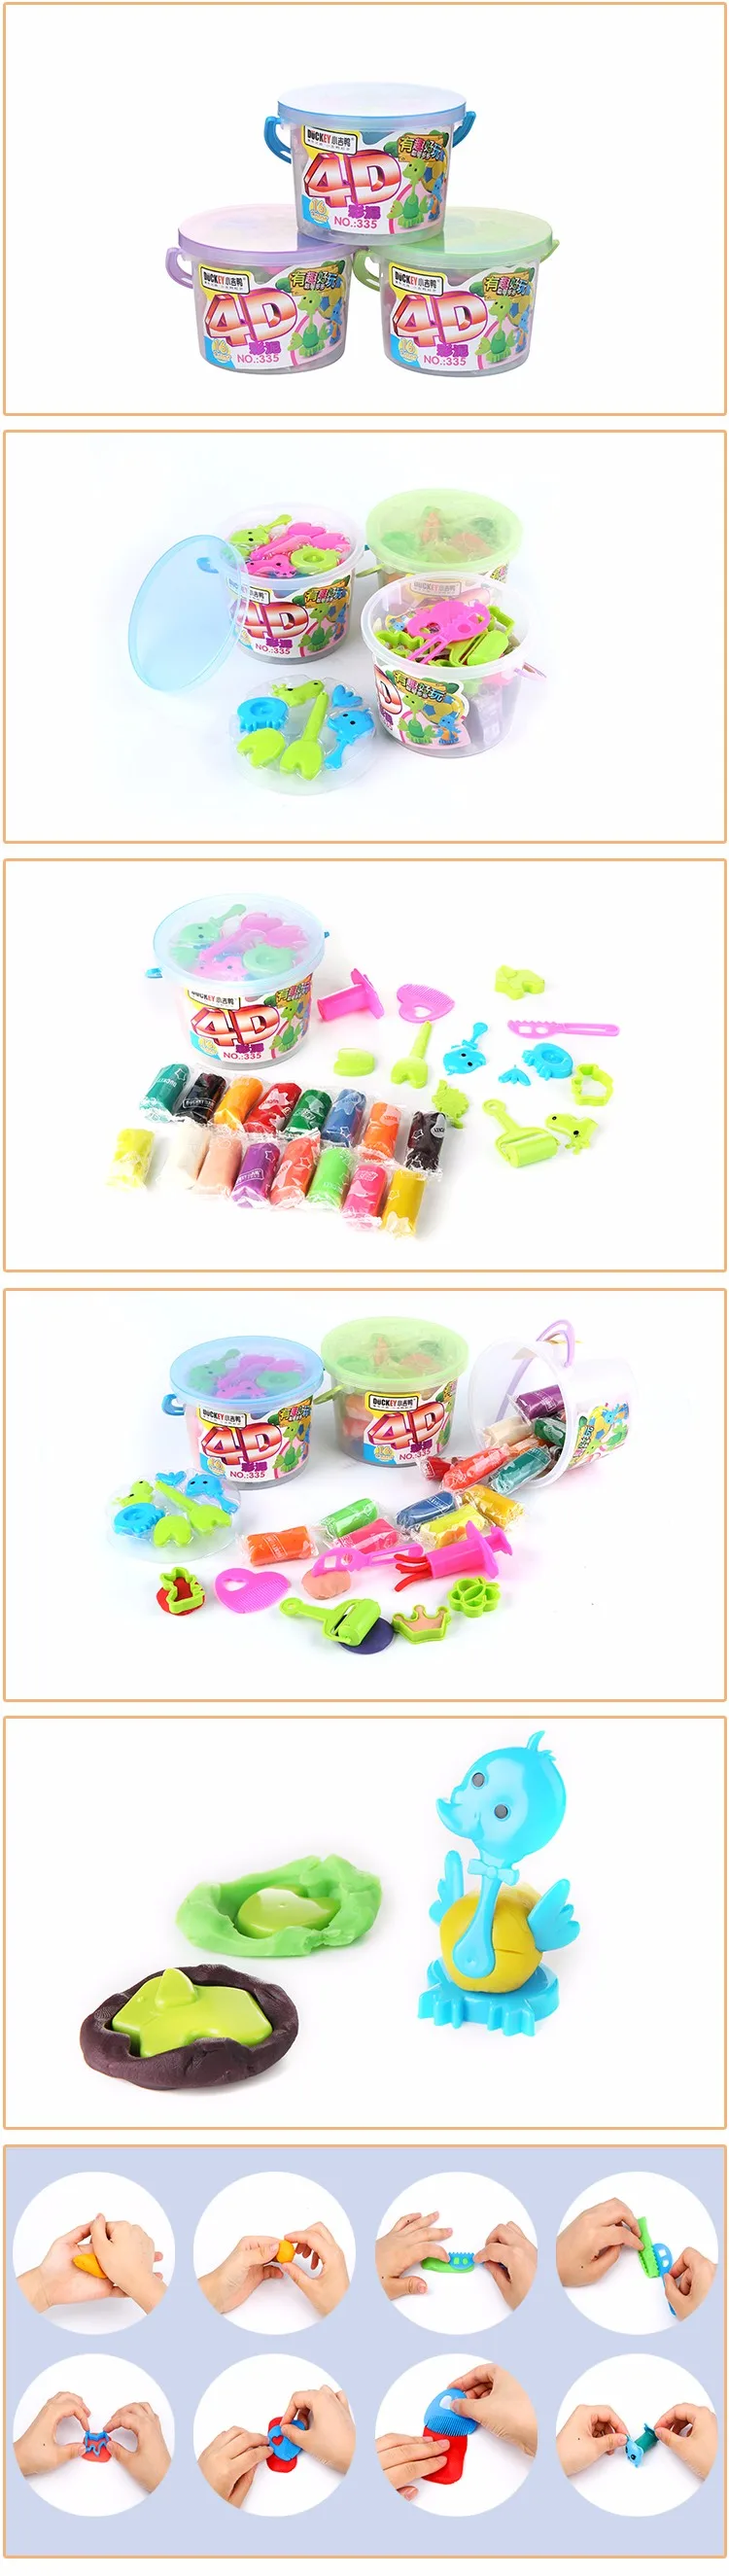 educational kids high quality intelligent play dough toys